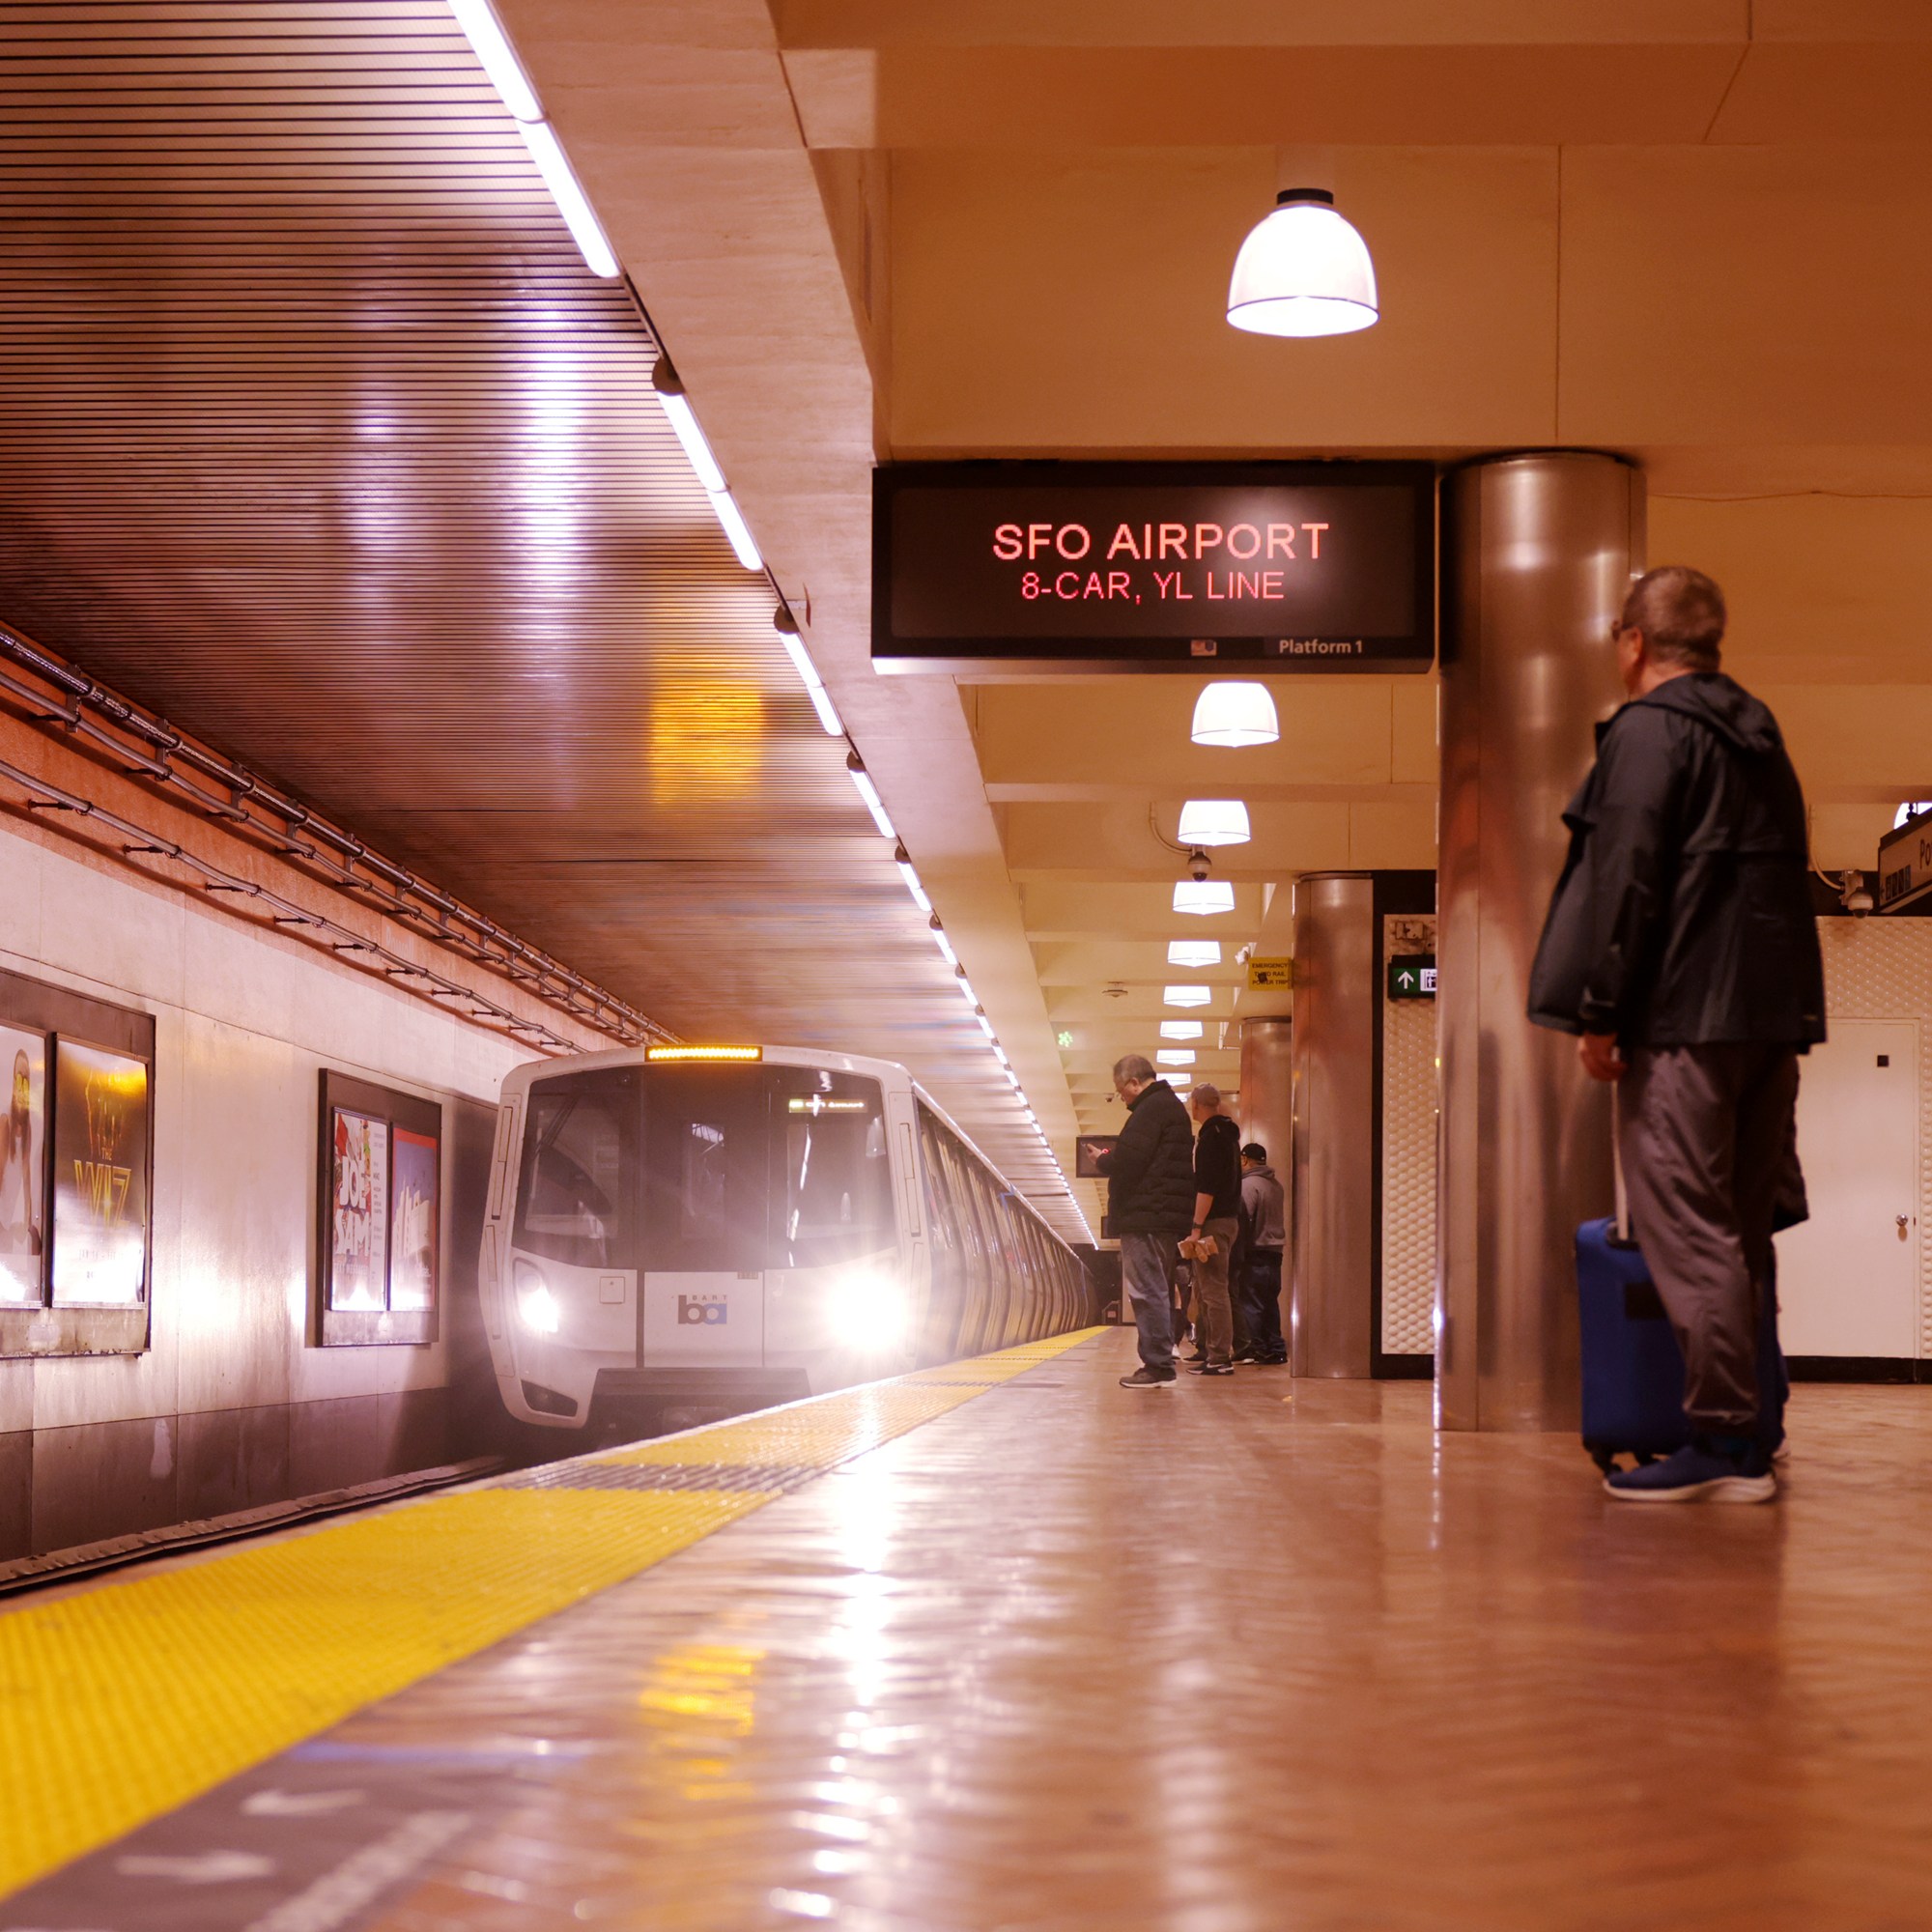 A subway platform with people waiting, a train approaching, and signs indicating the destination as "SFO Airport" on an 8-car Yellow Line.